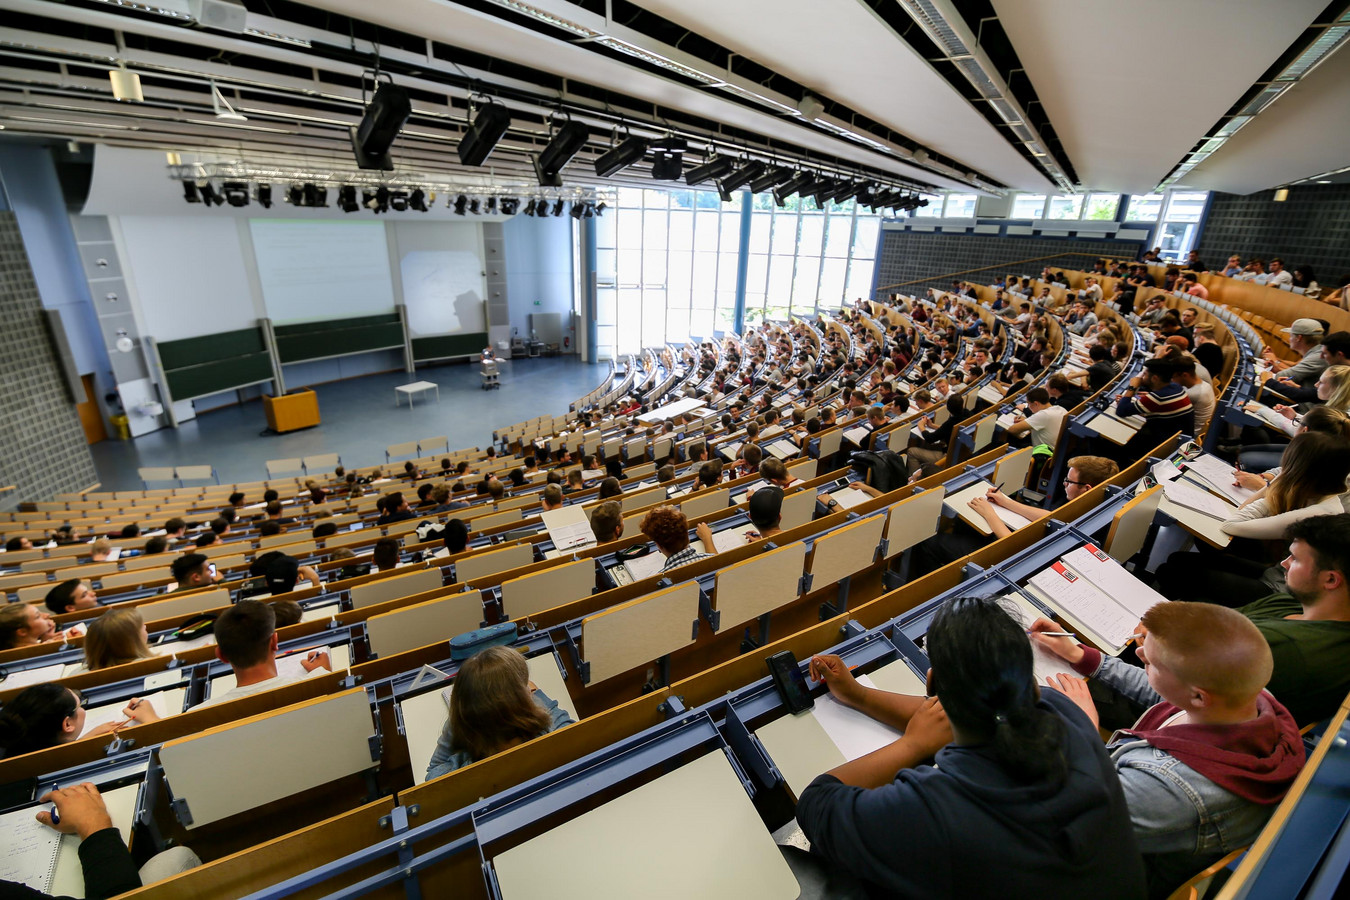 Students sit in a lecture hall.